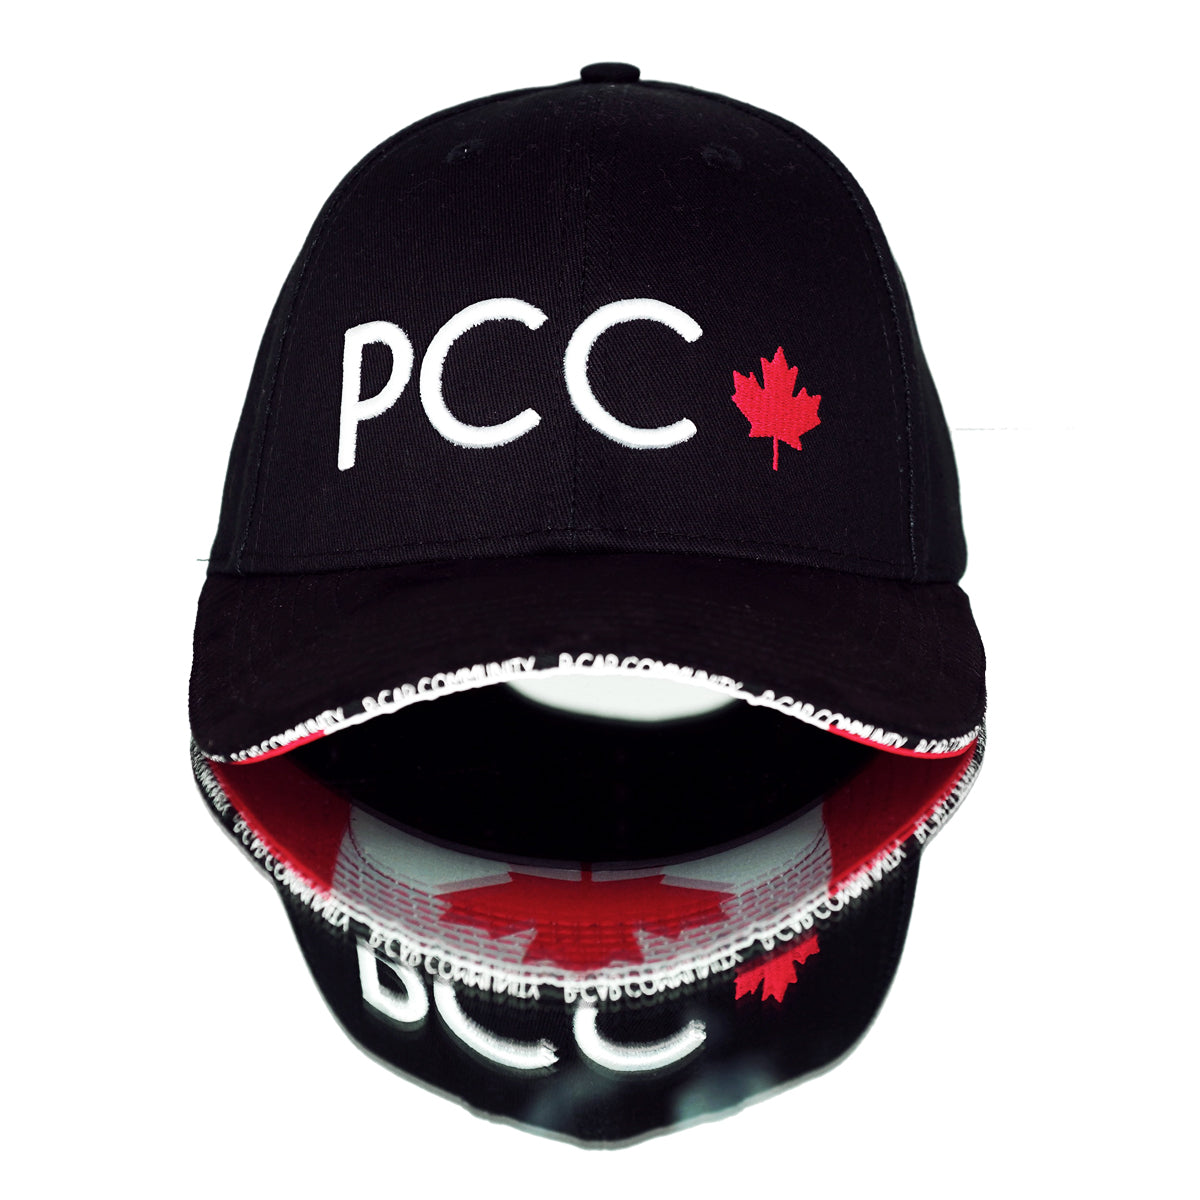 PCC - Micro Curved